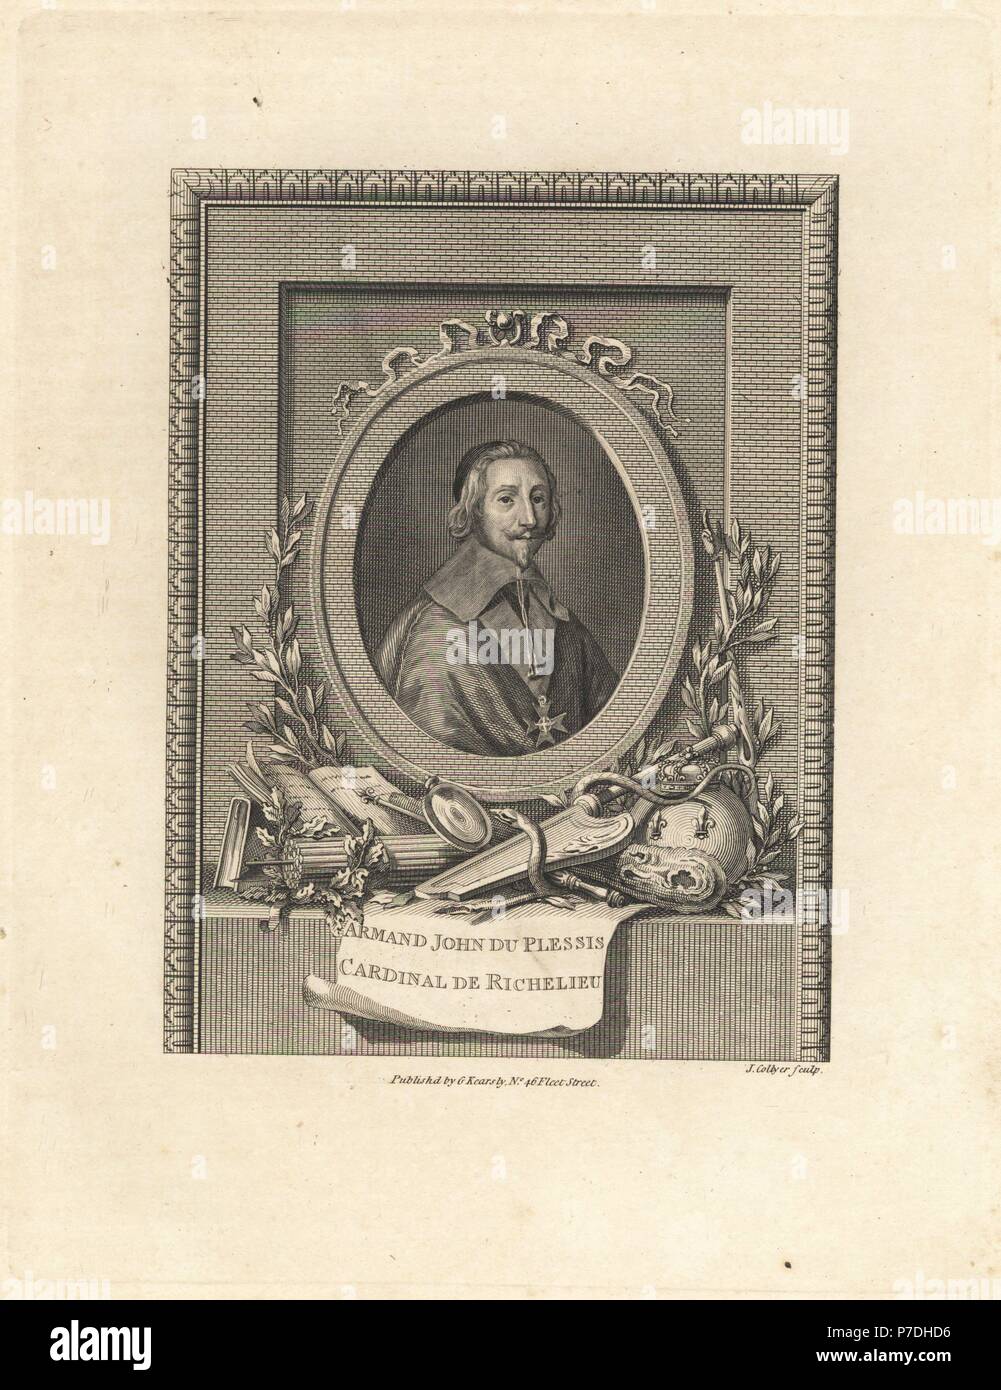 Cardinal de Richelieu, Armand Jean du Plessis, French clergyman, noble and statesman. Copperplate engraving by Joshua Collyer from The Copper Plate Magazine or Monthly Treasure, G. Kearsley, London, 1778. Stock Photo